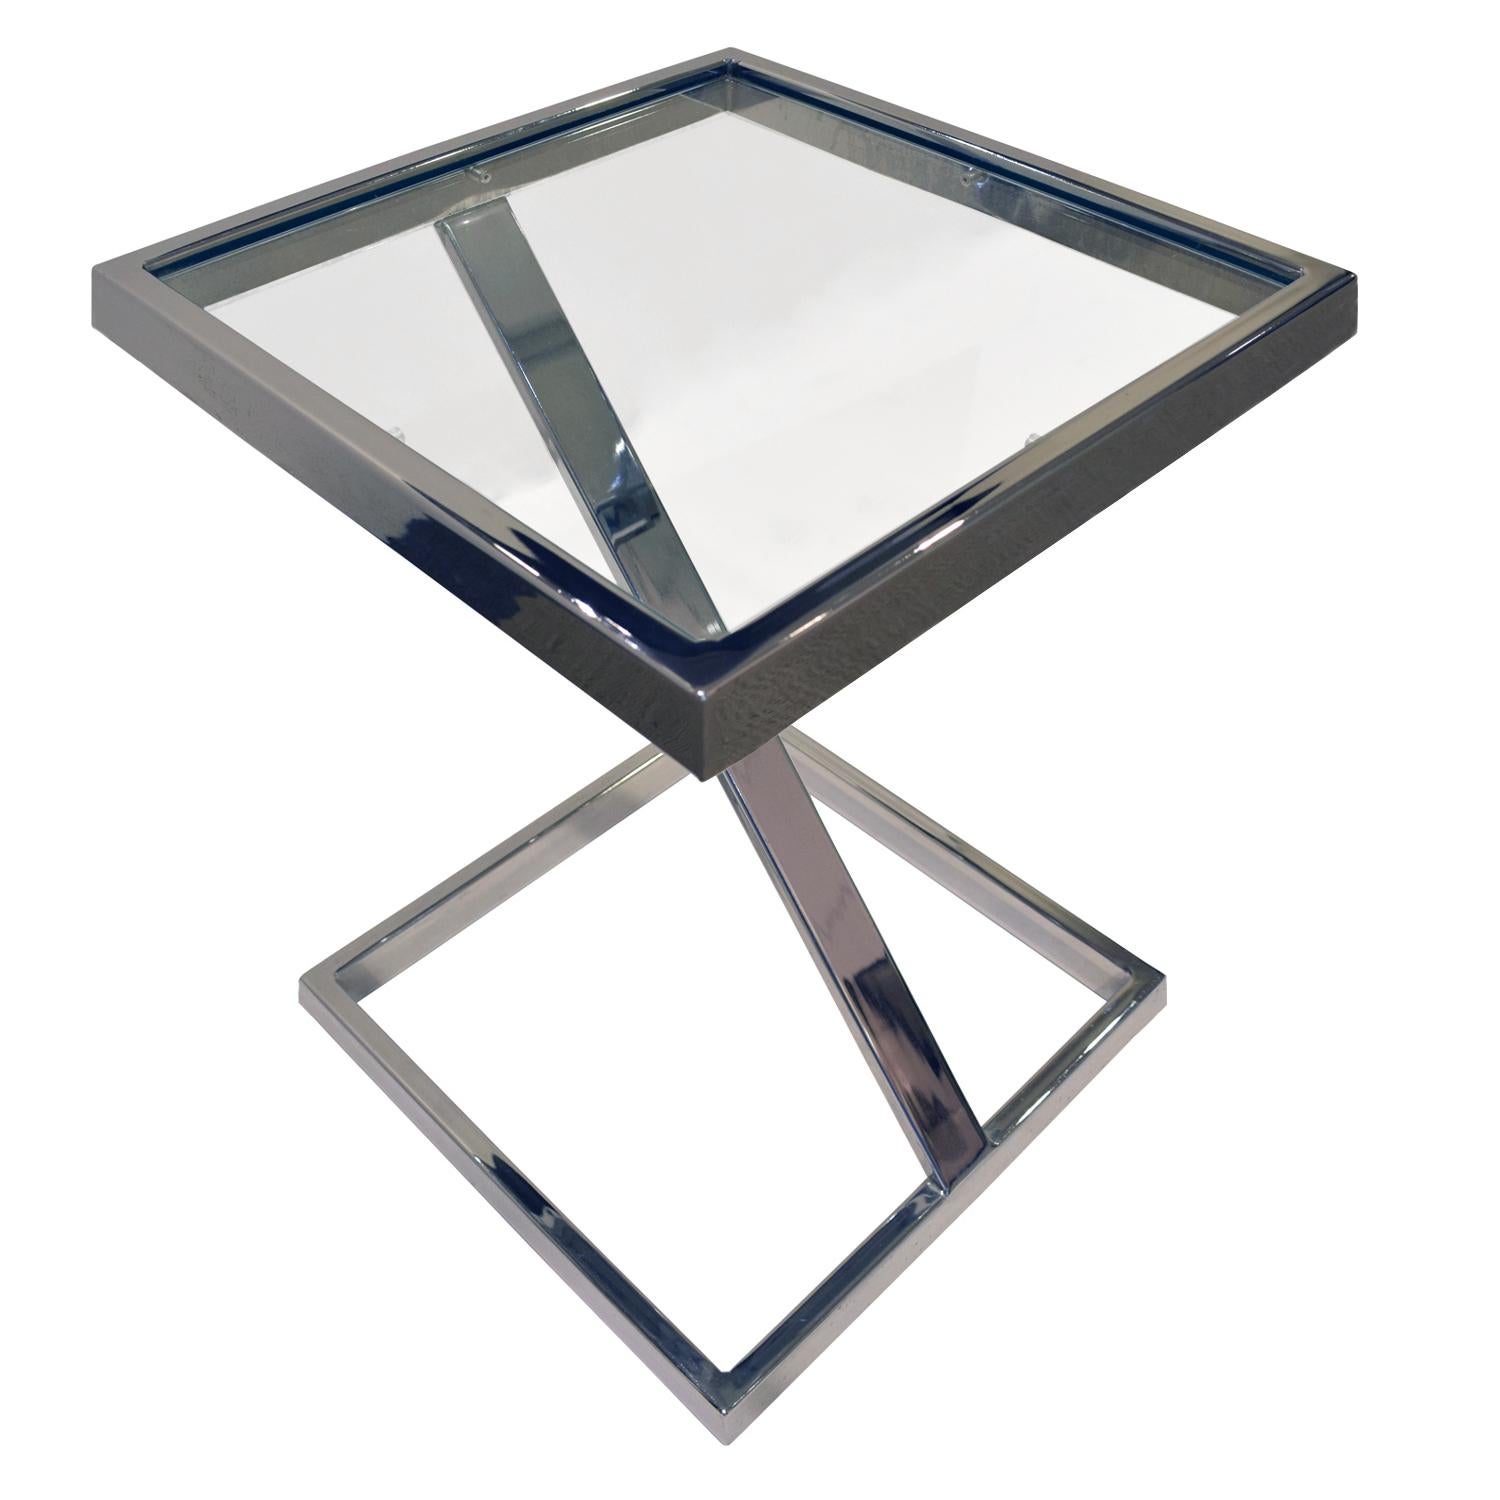 Cantilevered side table in chrome with inset glass top by Brueton Industries, American, 1970s. This is a very cool design.